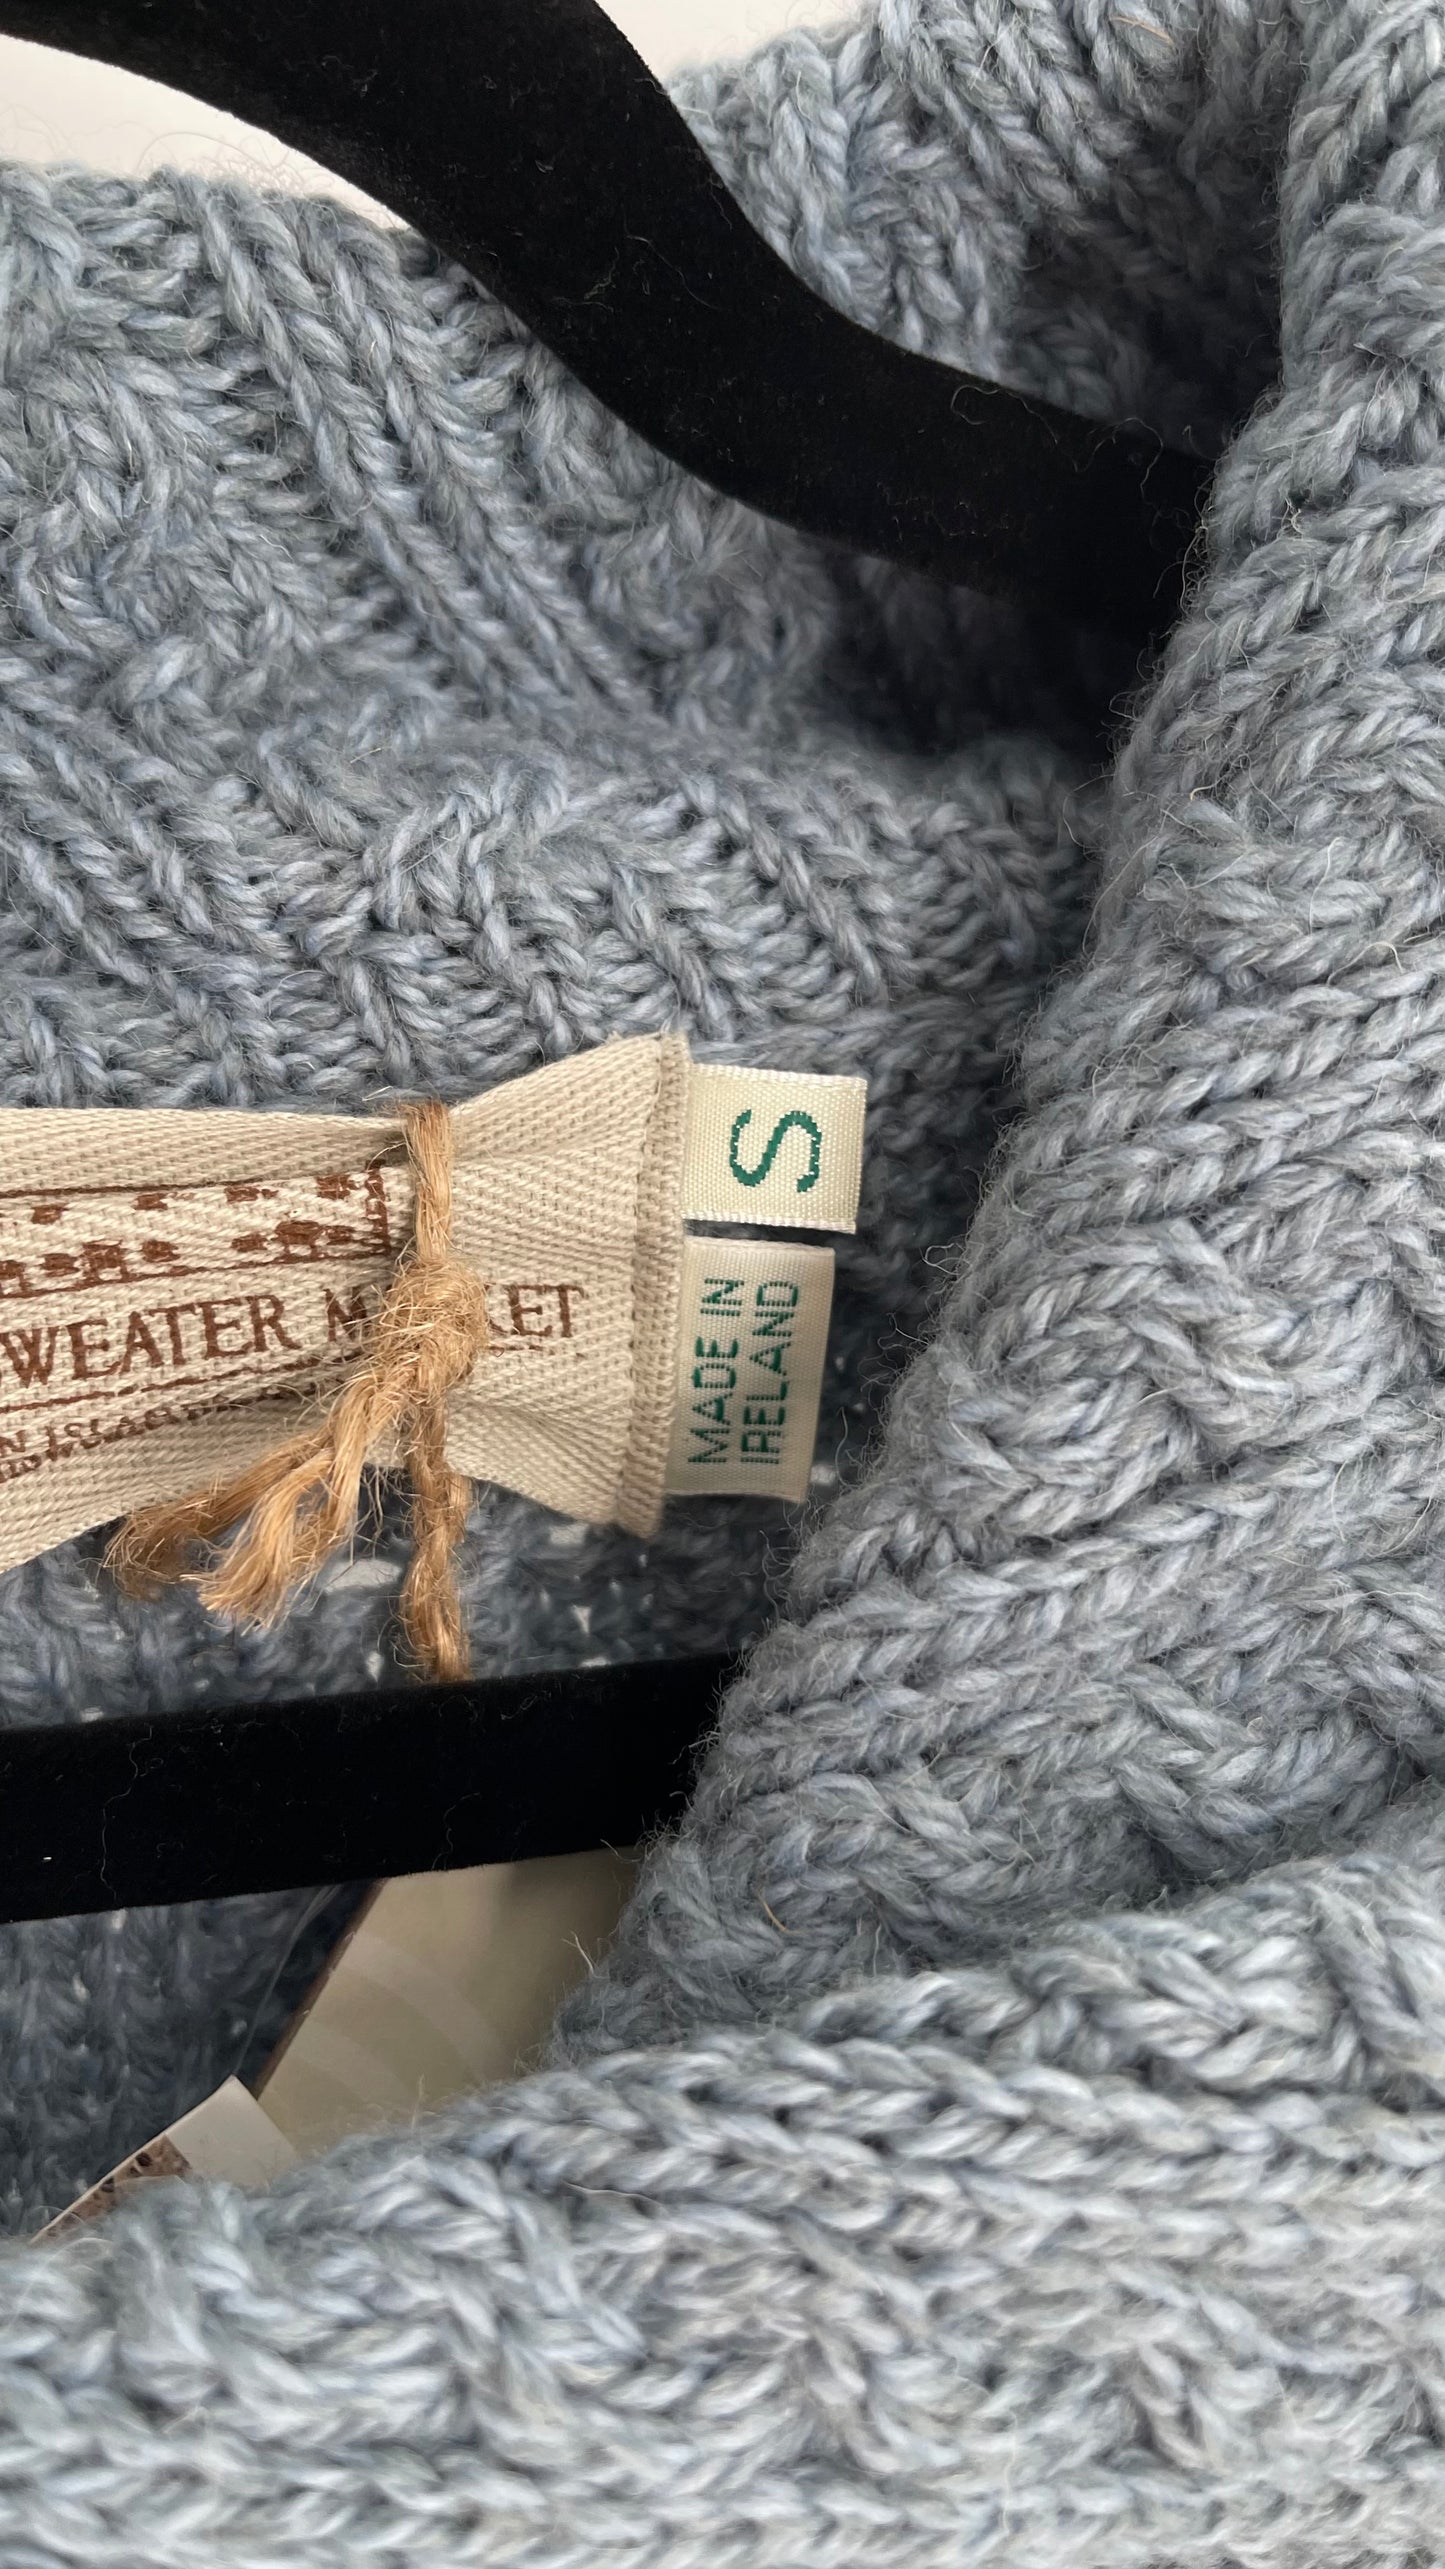 Authentic Irish Aran Sweater Market Slate Blue Aran Stitch Sweater with Oversized Wooden Button Detail and Certificate of Authenticity (Small)